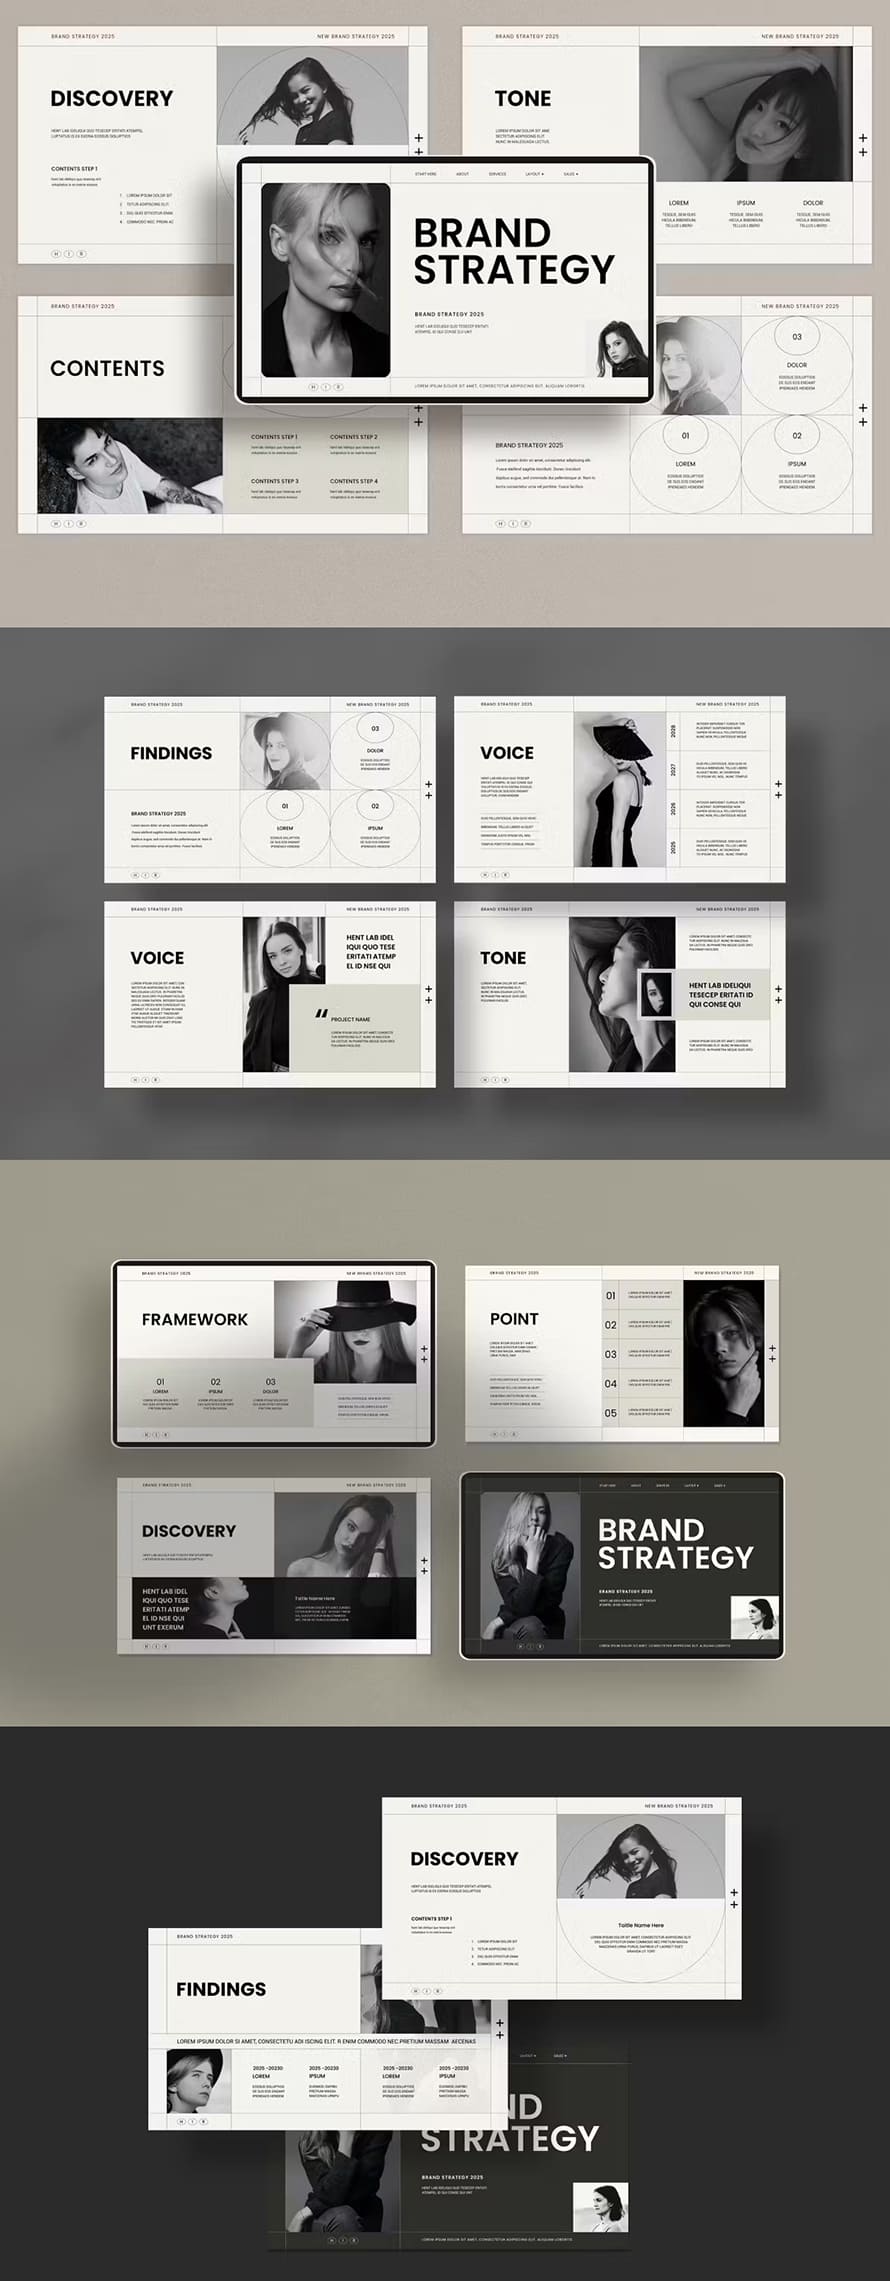 Awesome Brand Strategy Template